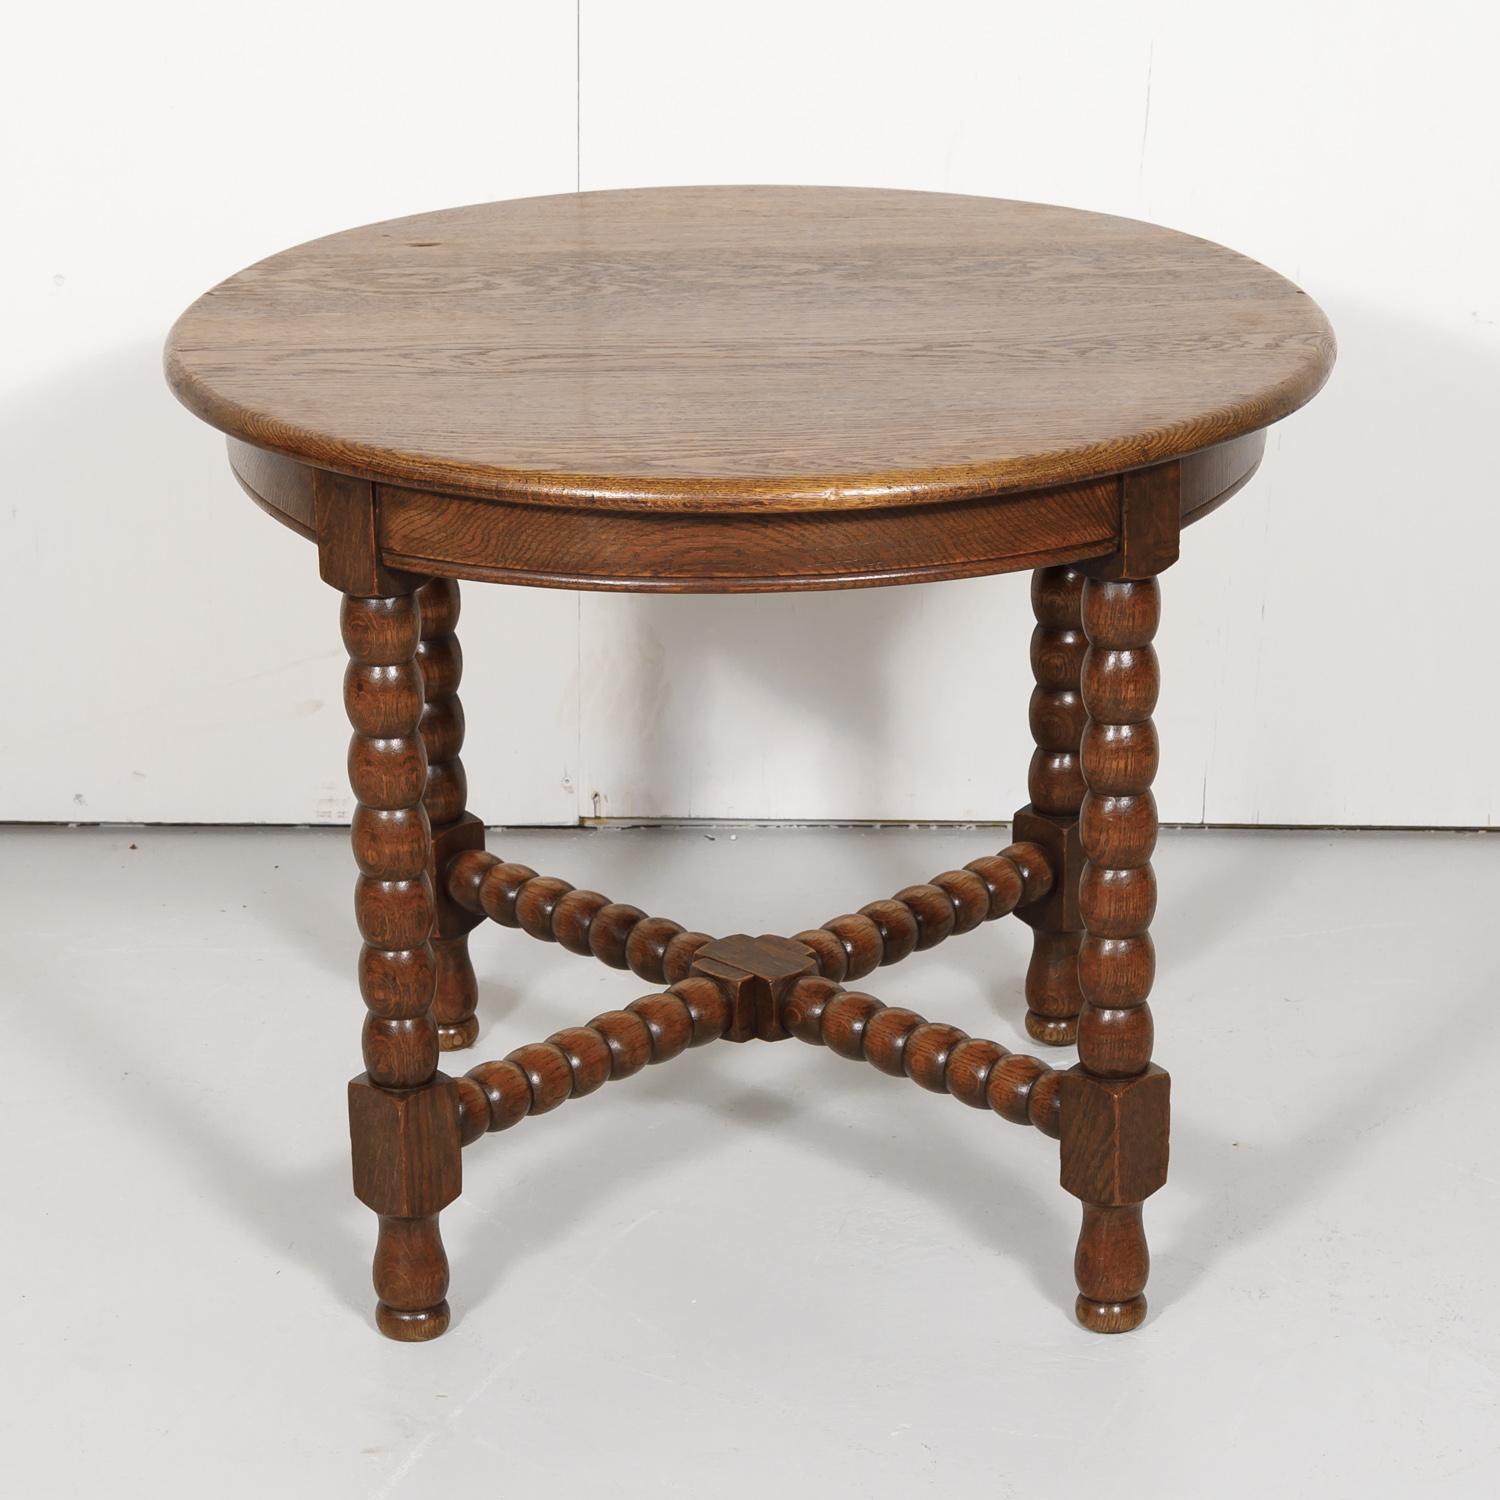 Vintage country French Louis XIII style round bobbin leg side table constructed of oak in the Normandy region, circa 1950s.

Dimensions:
Height 24